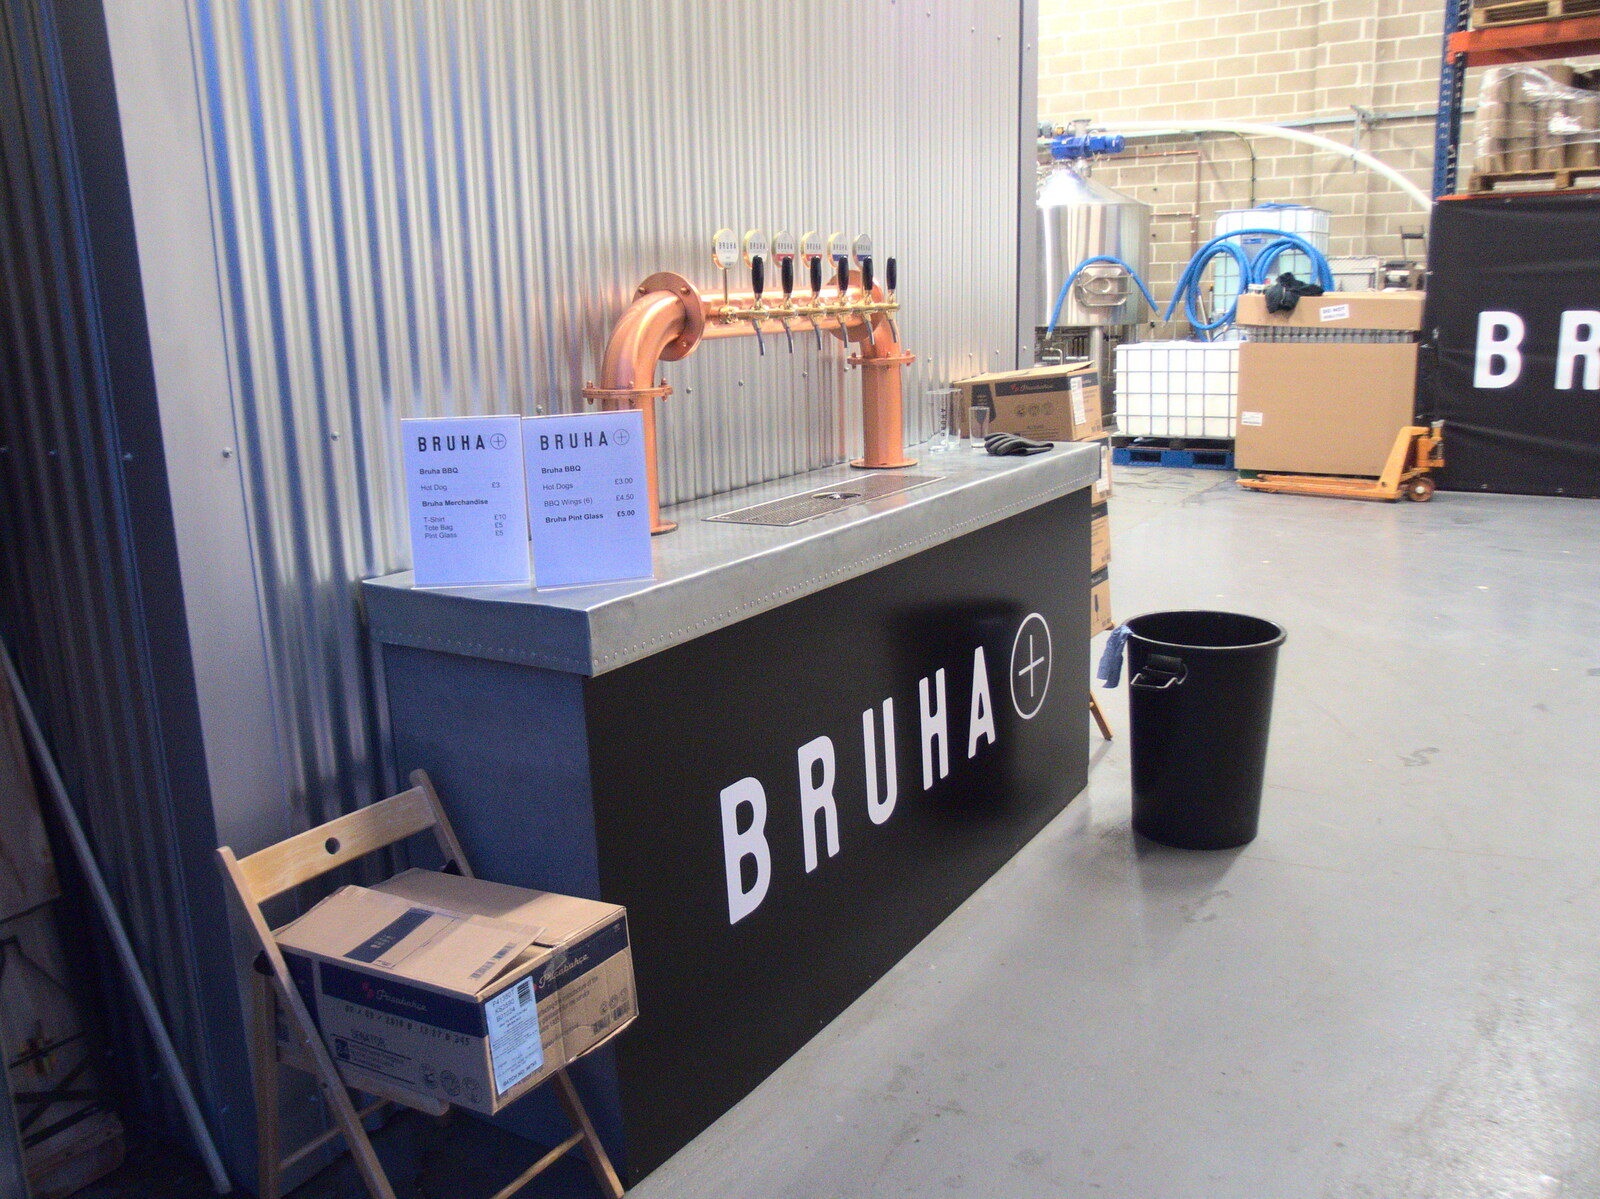 The bar has moved into the warehouse/brewery from Garden Centres, and Hamish Visits, Brome, Suffolk - 28th May 2021